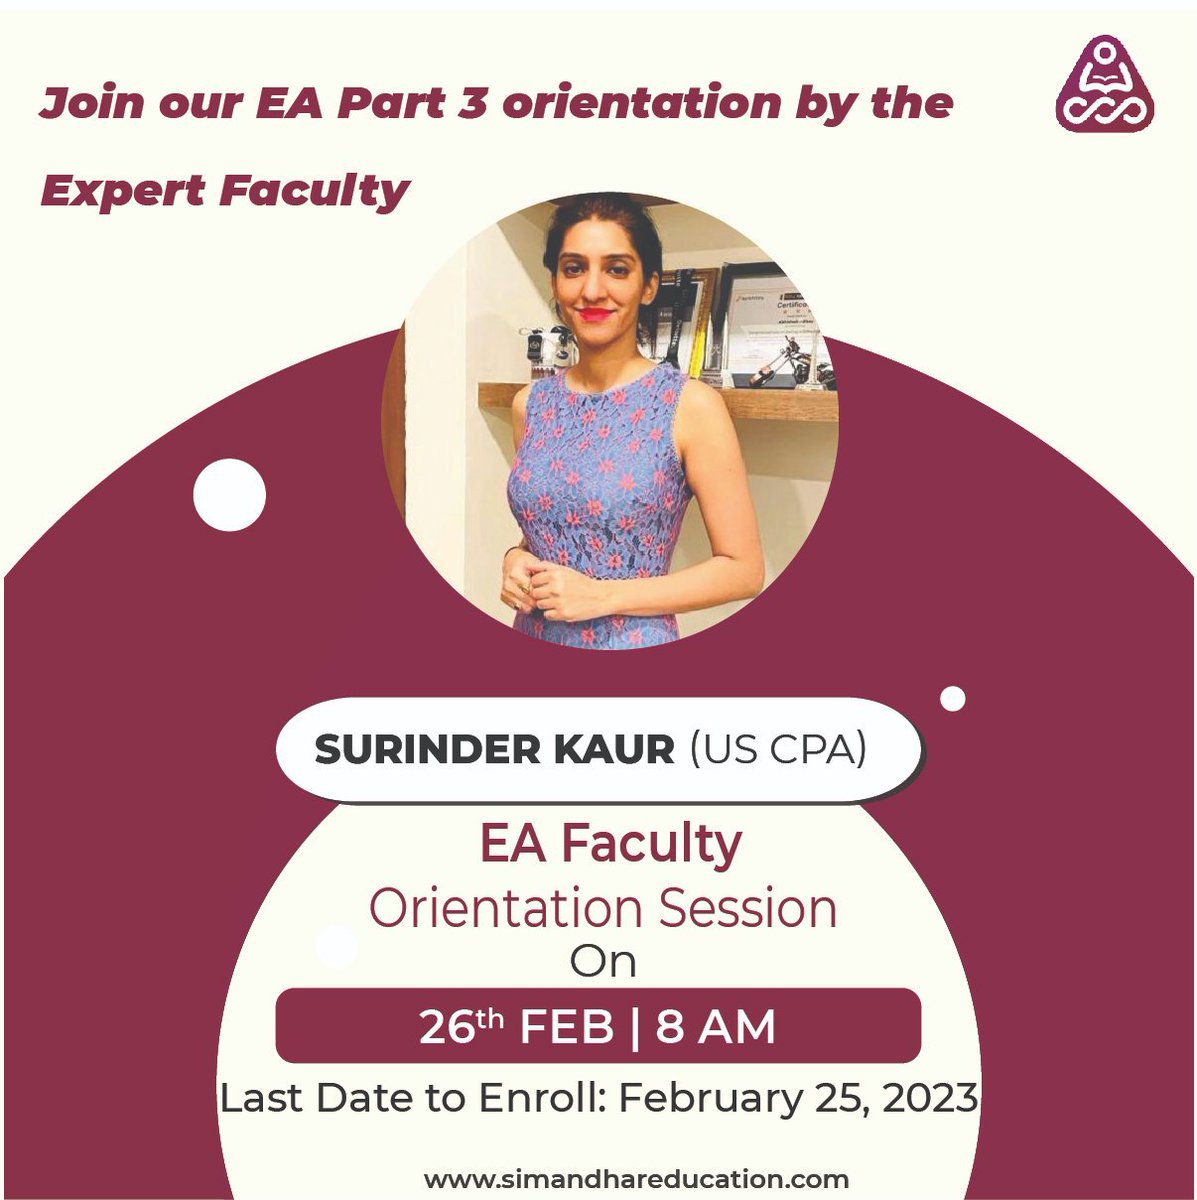 The EA part 3 orientation will take place on 26/02/2023 at 8 AM, by our expert faculty, Surinder Kaur, US CPA. 
Last date for registration: February 25, 2023
Hurry up!
Register Now:bit.ly/3XzqWaG
#EACourse #eajobs #ea #changinglivesforbetter #eastudents #orientation